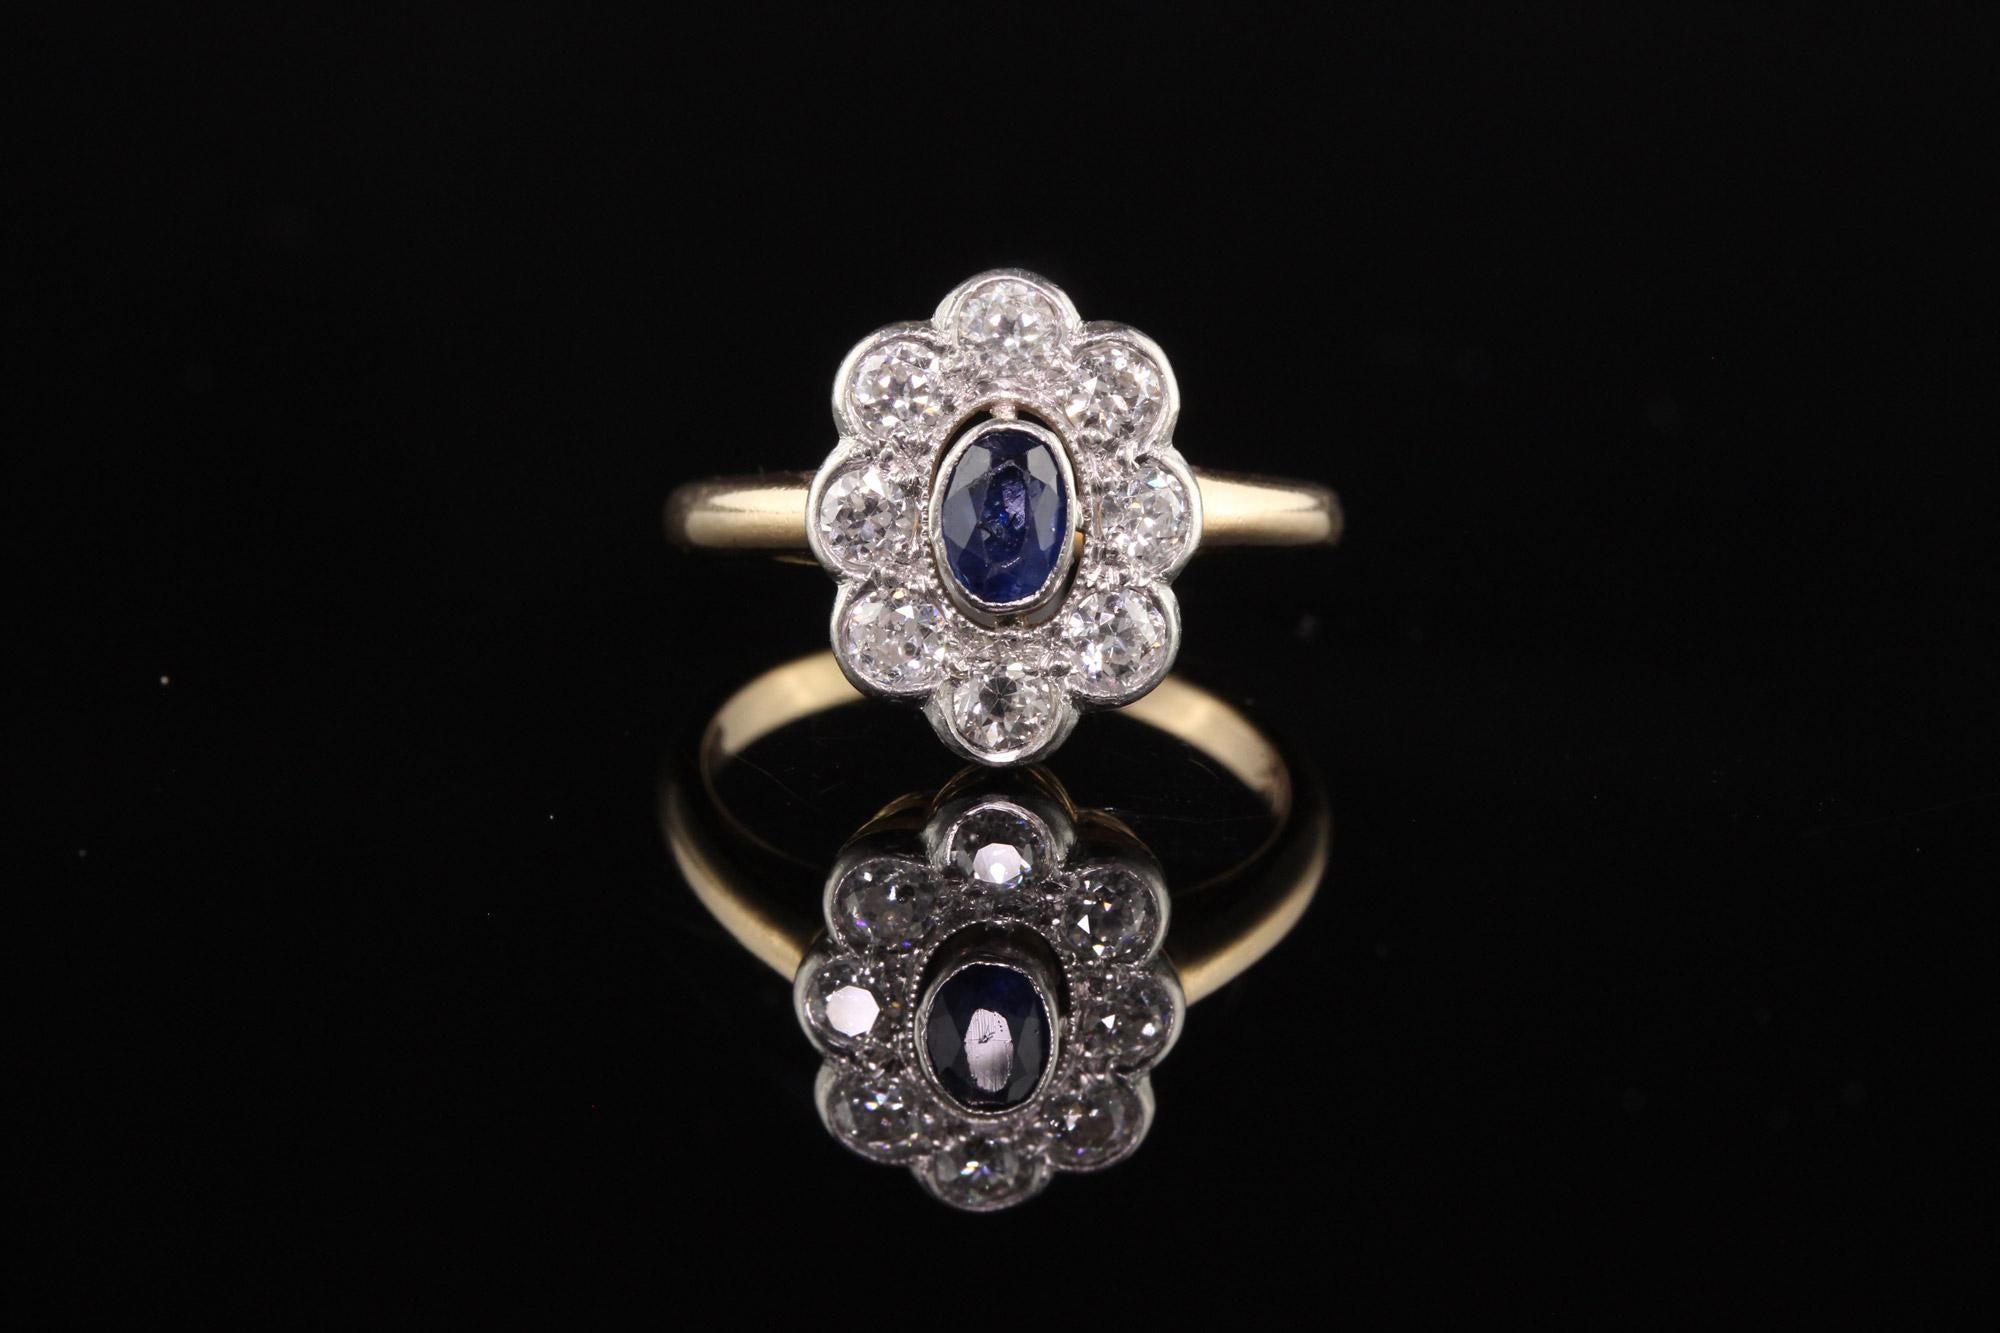 Antique Art Deco 14K Yellow Gold and Platinum Old Euro Diamond and Sapphire Ring In Good Condition For Sale In Great Neck, NY